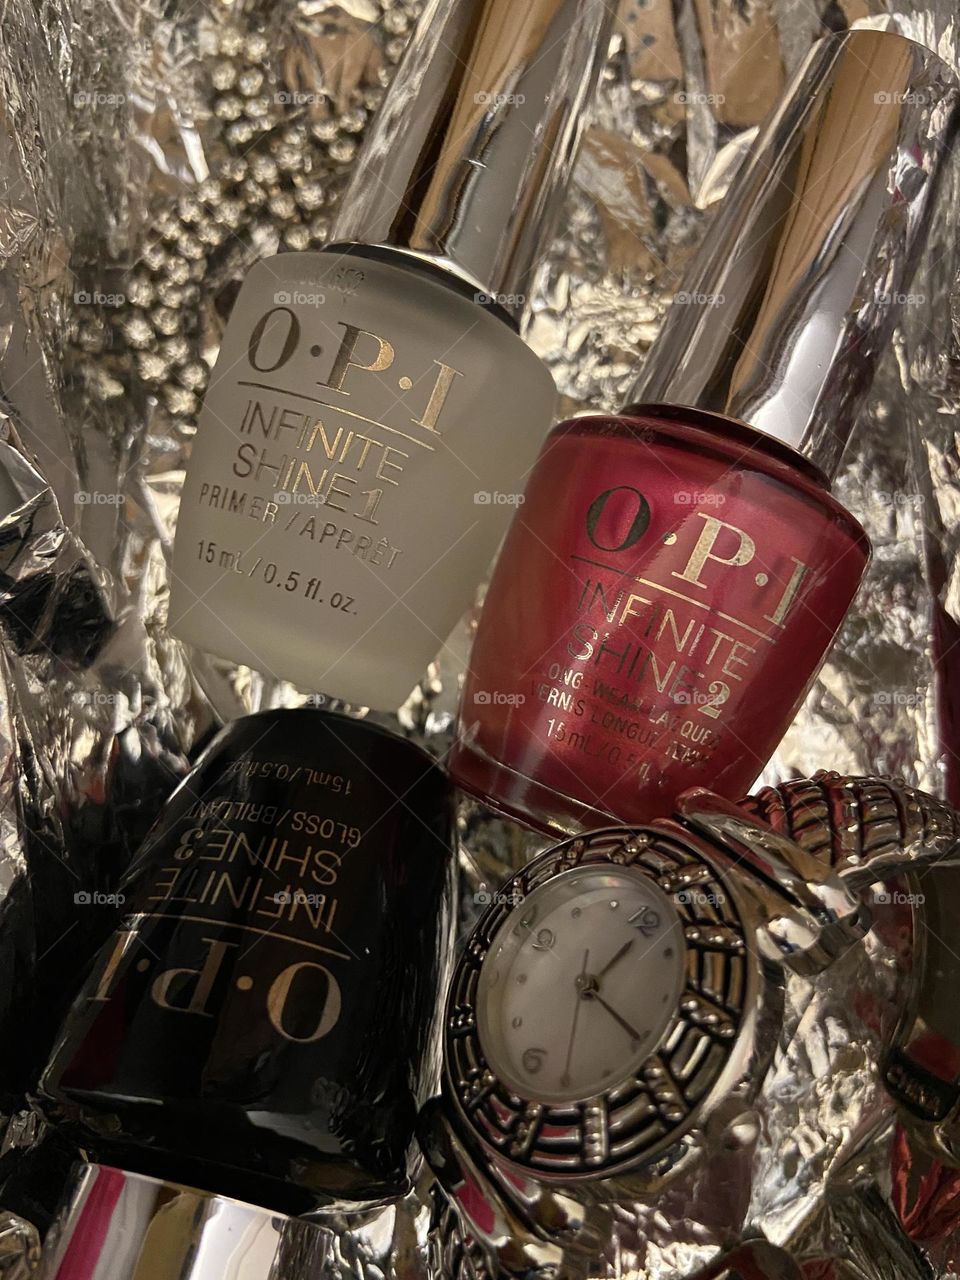 Bottles of Opi Infinite Shine Nail Lacquer displayed with a silver watch set at 12:15 and a silver bracelet twisted into the infinity symbol shape. All on a silver background. The nail polish shade is “15 minutes of flame.” 